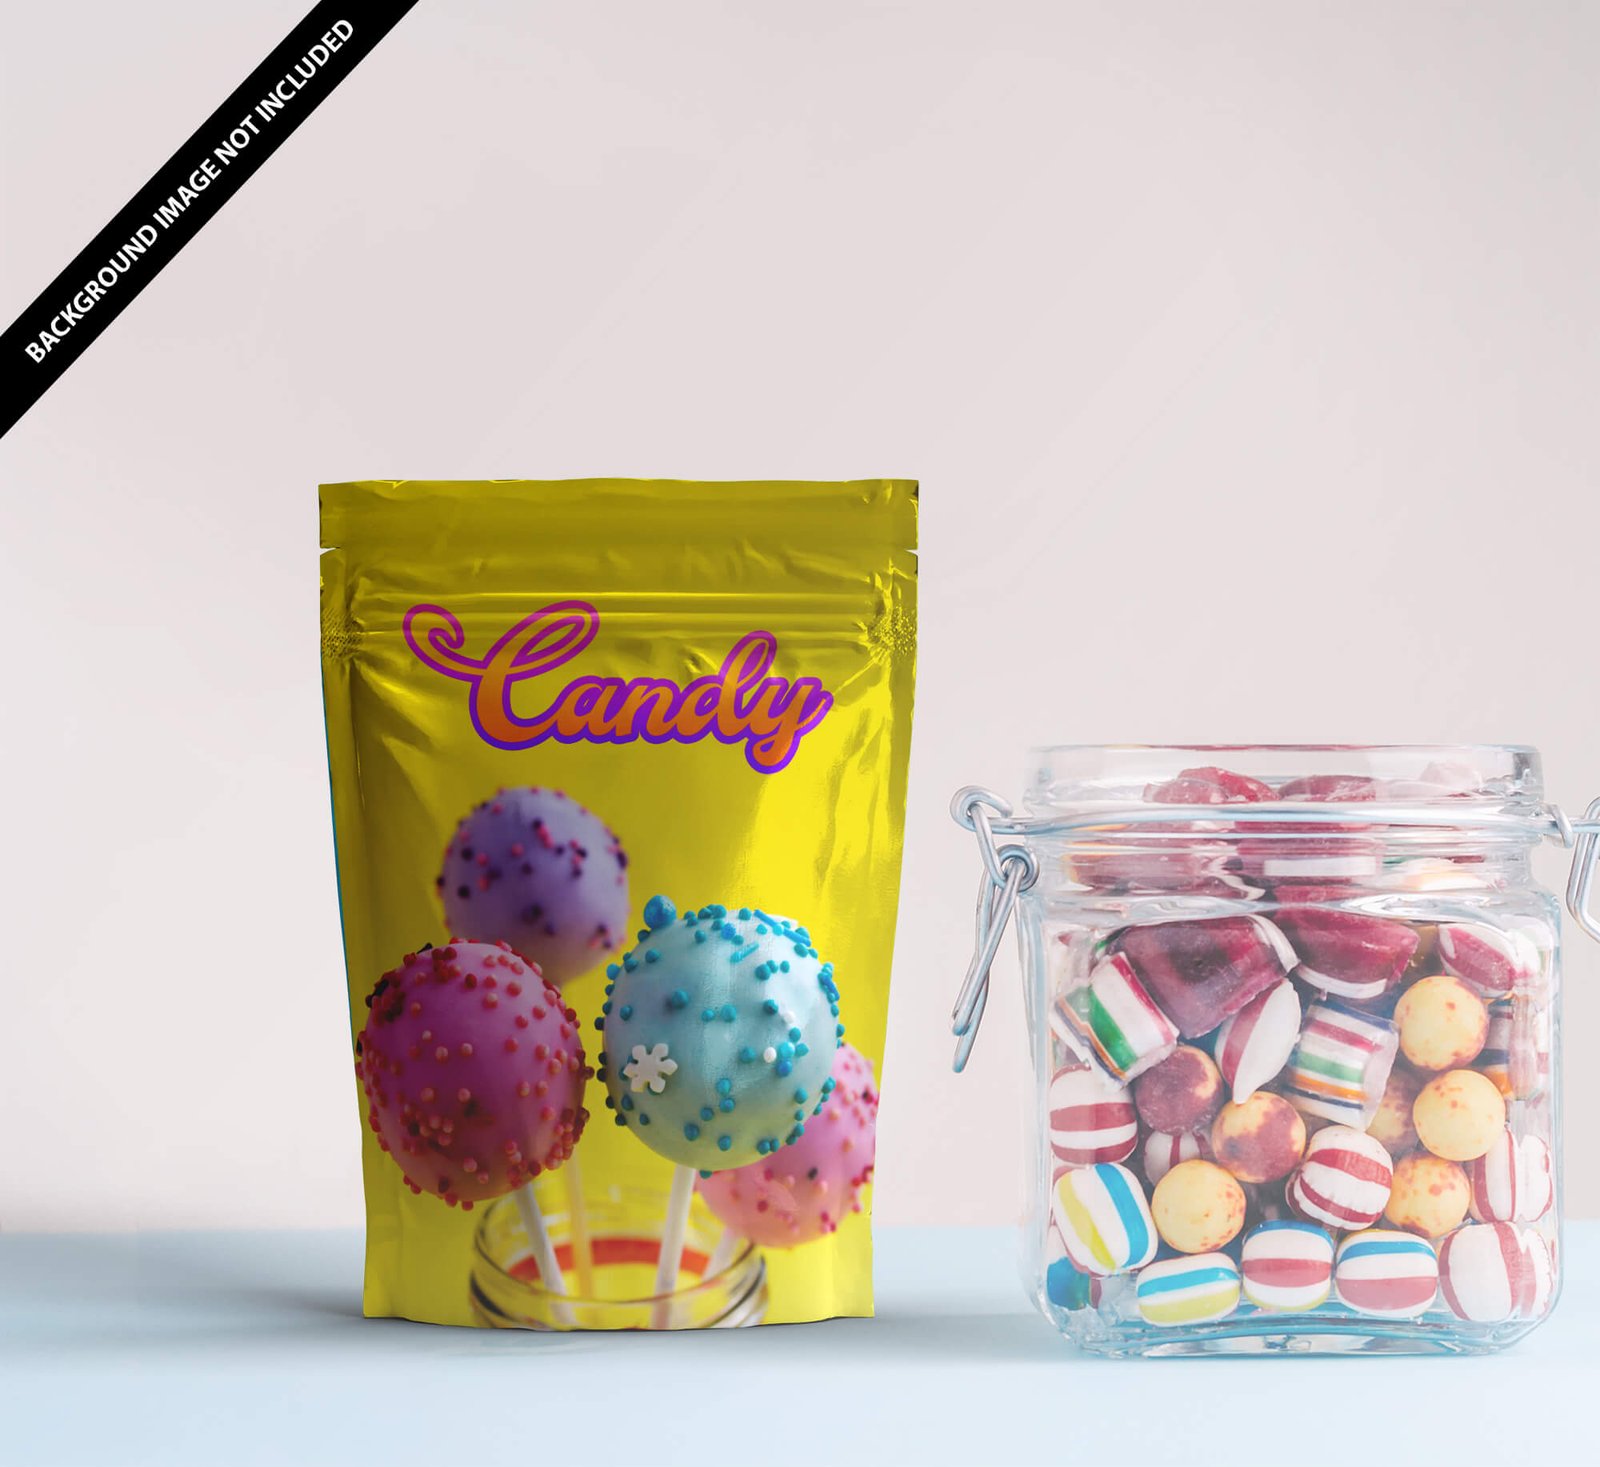 Candy Bag Mockup Party Favors Mockup Bag Topper Mock Up Styled Stock Photography Product Mockup Candy Bag Mock Up Bag Topper Mockup